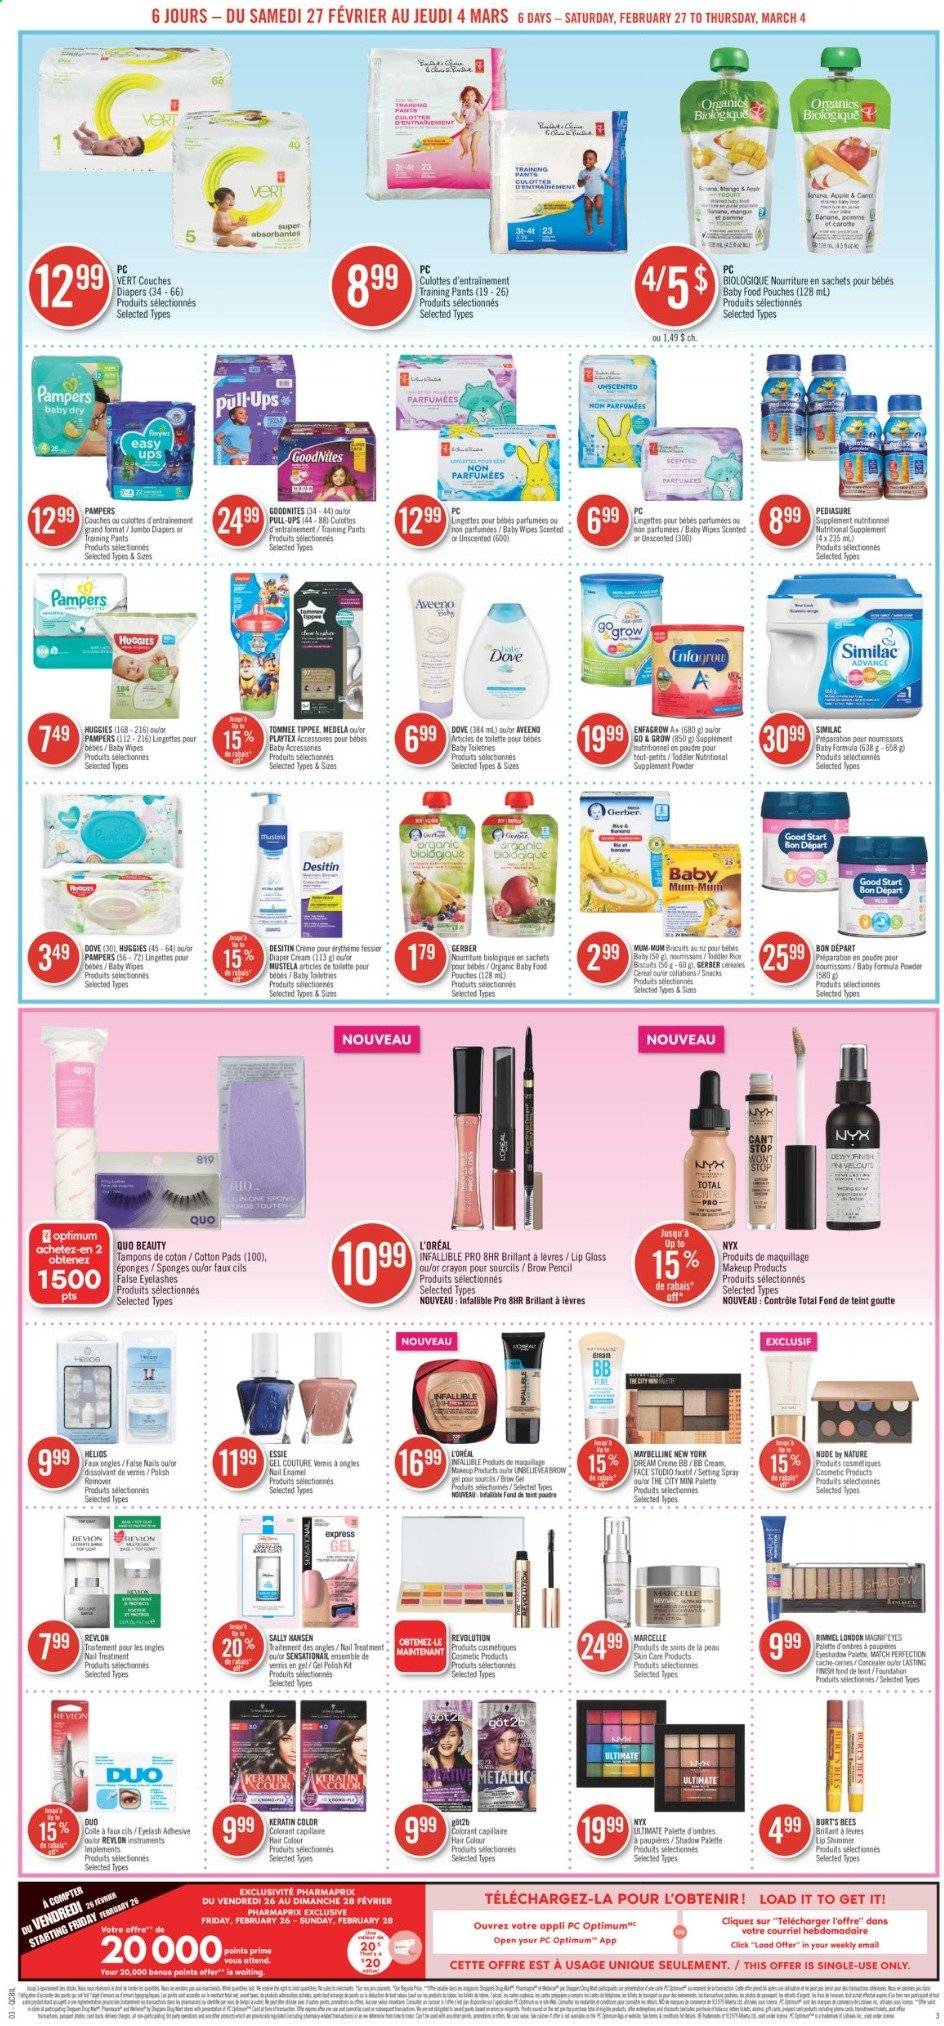 thumbnail - Pharmaprix Flyer - February 27, 2021 - March 04, 2021 - Sales products - snack, Mars, biscuit, Gerber, cereals, rice, Similac, organic baby food, wipes, pants, baby wipes, nappies, baby pants, Aveeno, Playtex, tampons, L’Oréal, NYX Cosmetics, Revlon, hair color, keratin, Mum, nail enamel, lip gloss, makeup, Rimmel, eyelashes, setting spray, sponge, pencil, nutritional supplement, Desitin, Maybelline, Sally Hansen, Huggies, Palette, Pampers. Page 3.